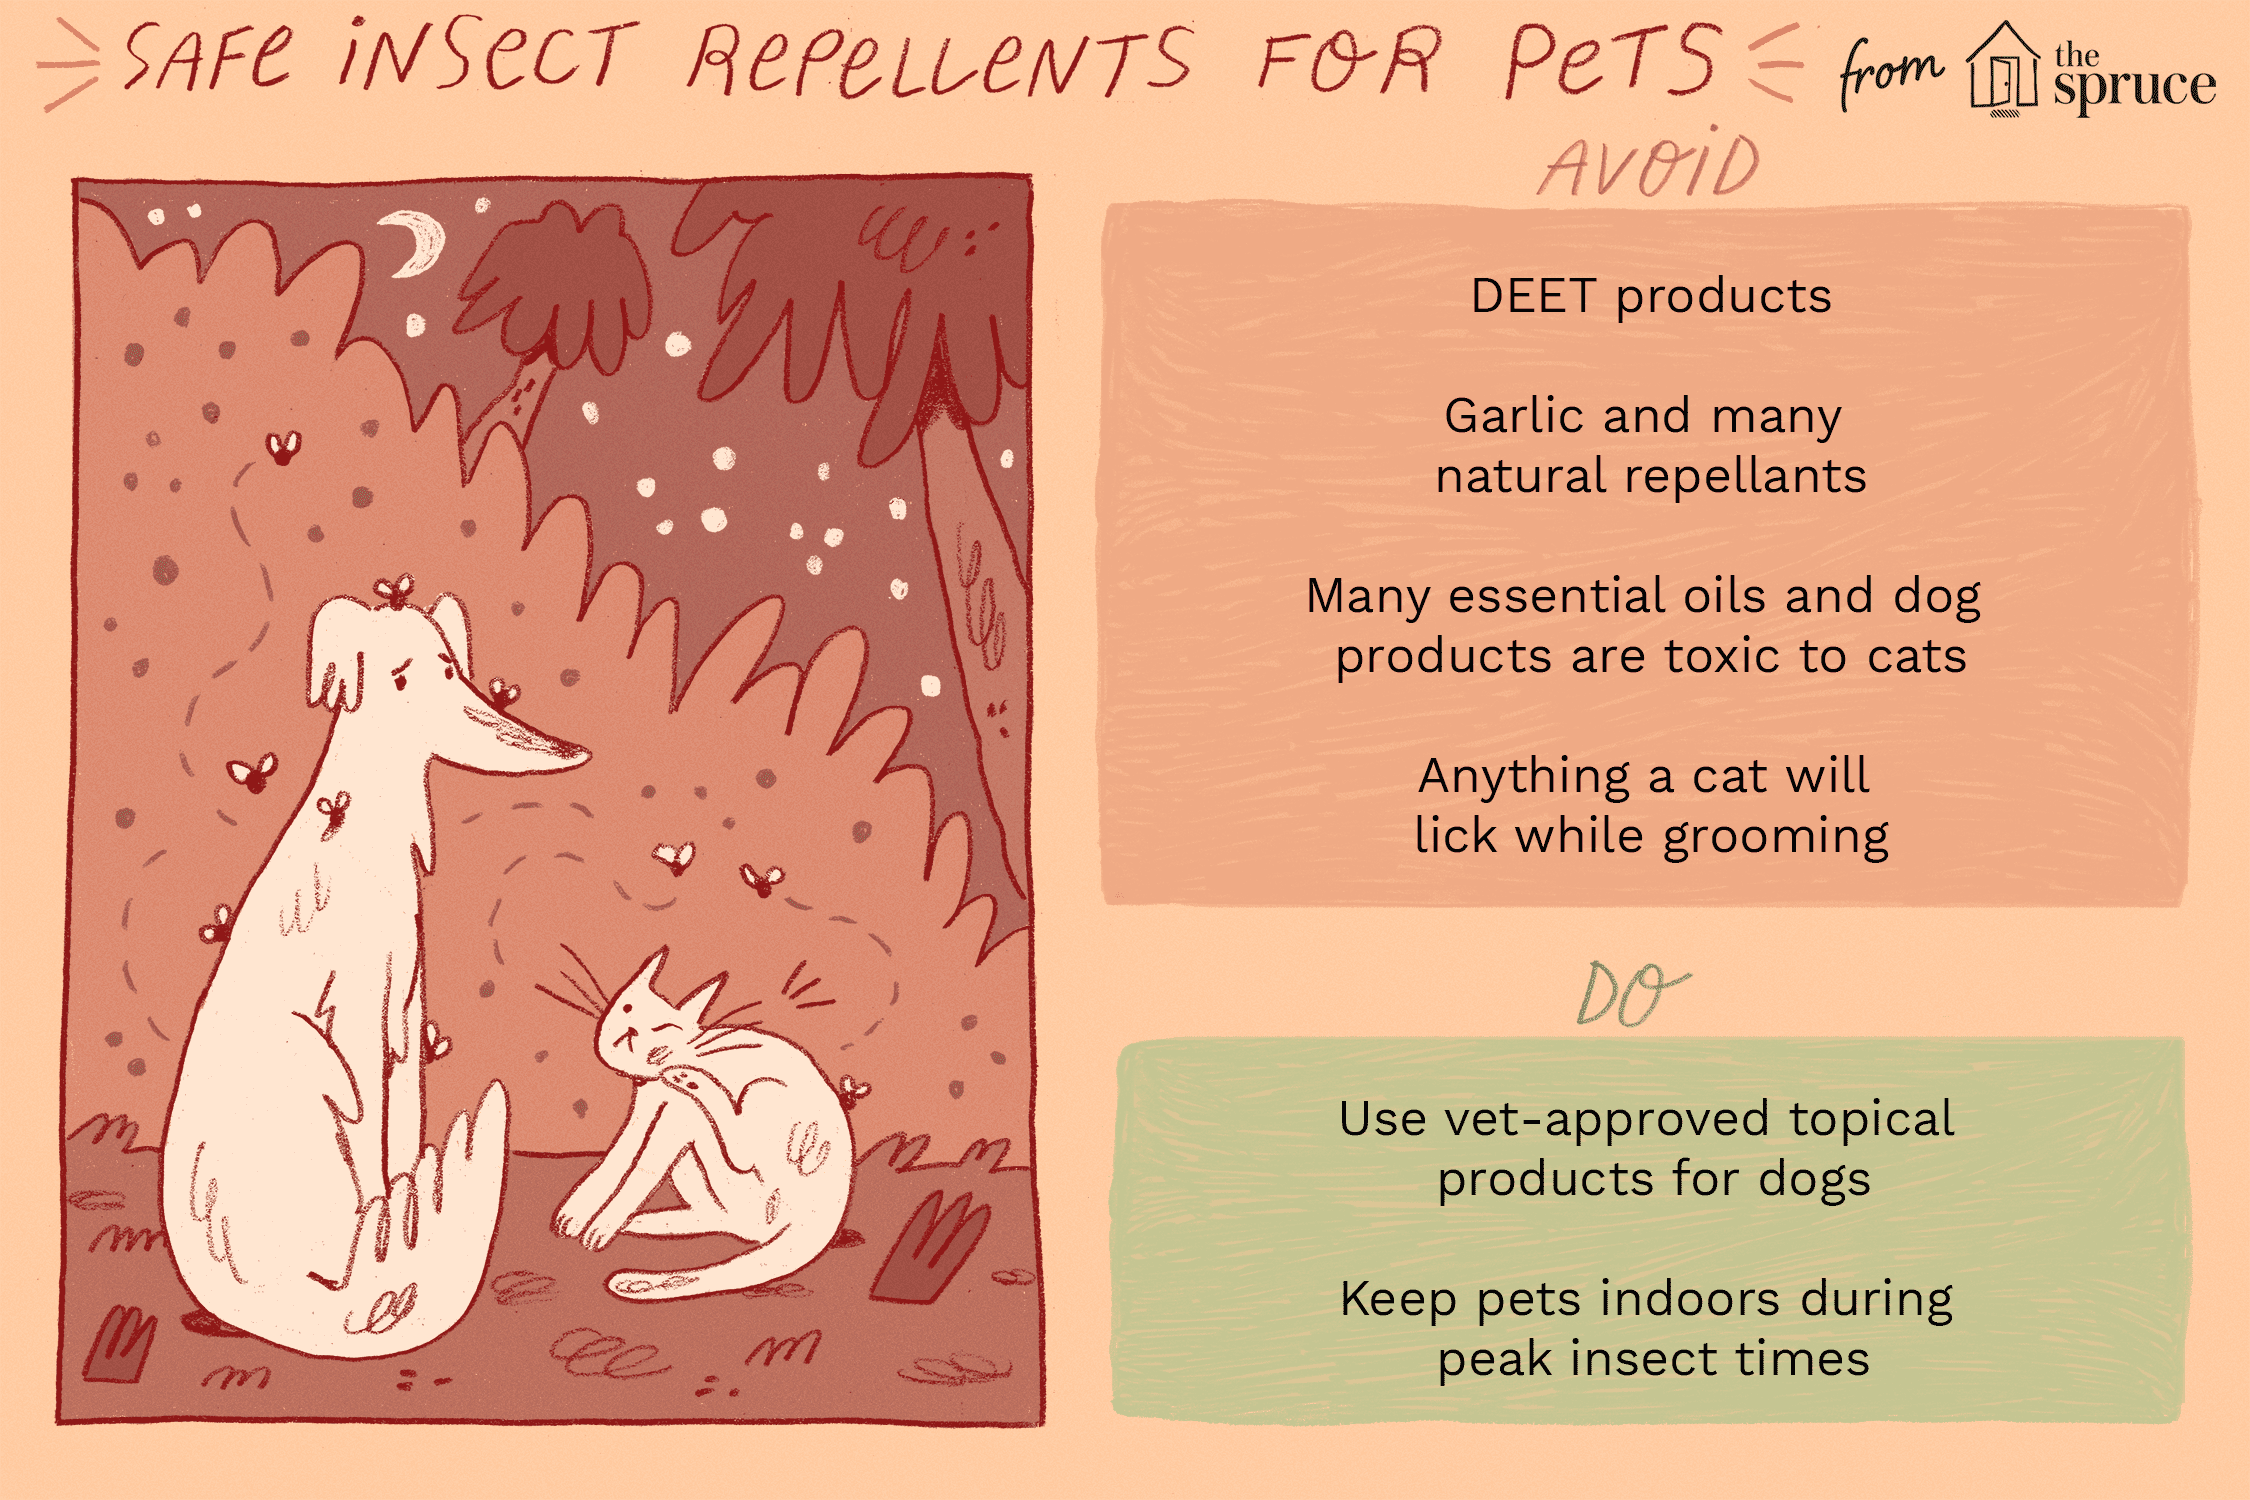 illustration of safe and toxic insect repellents for dogs and cats